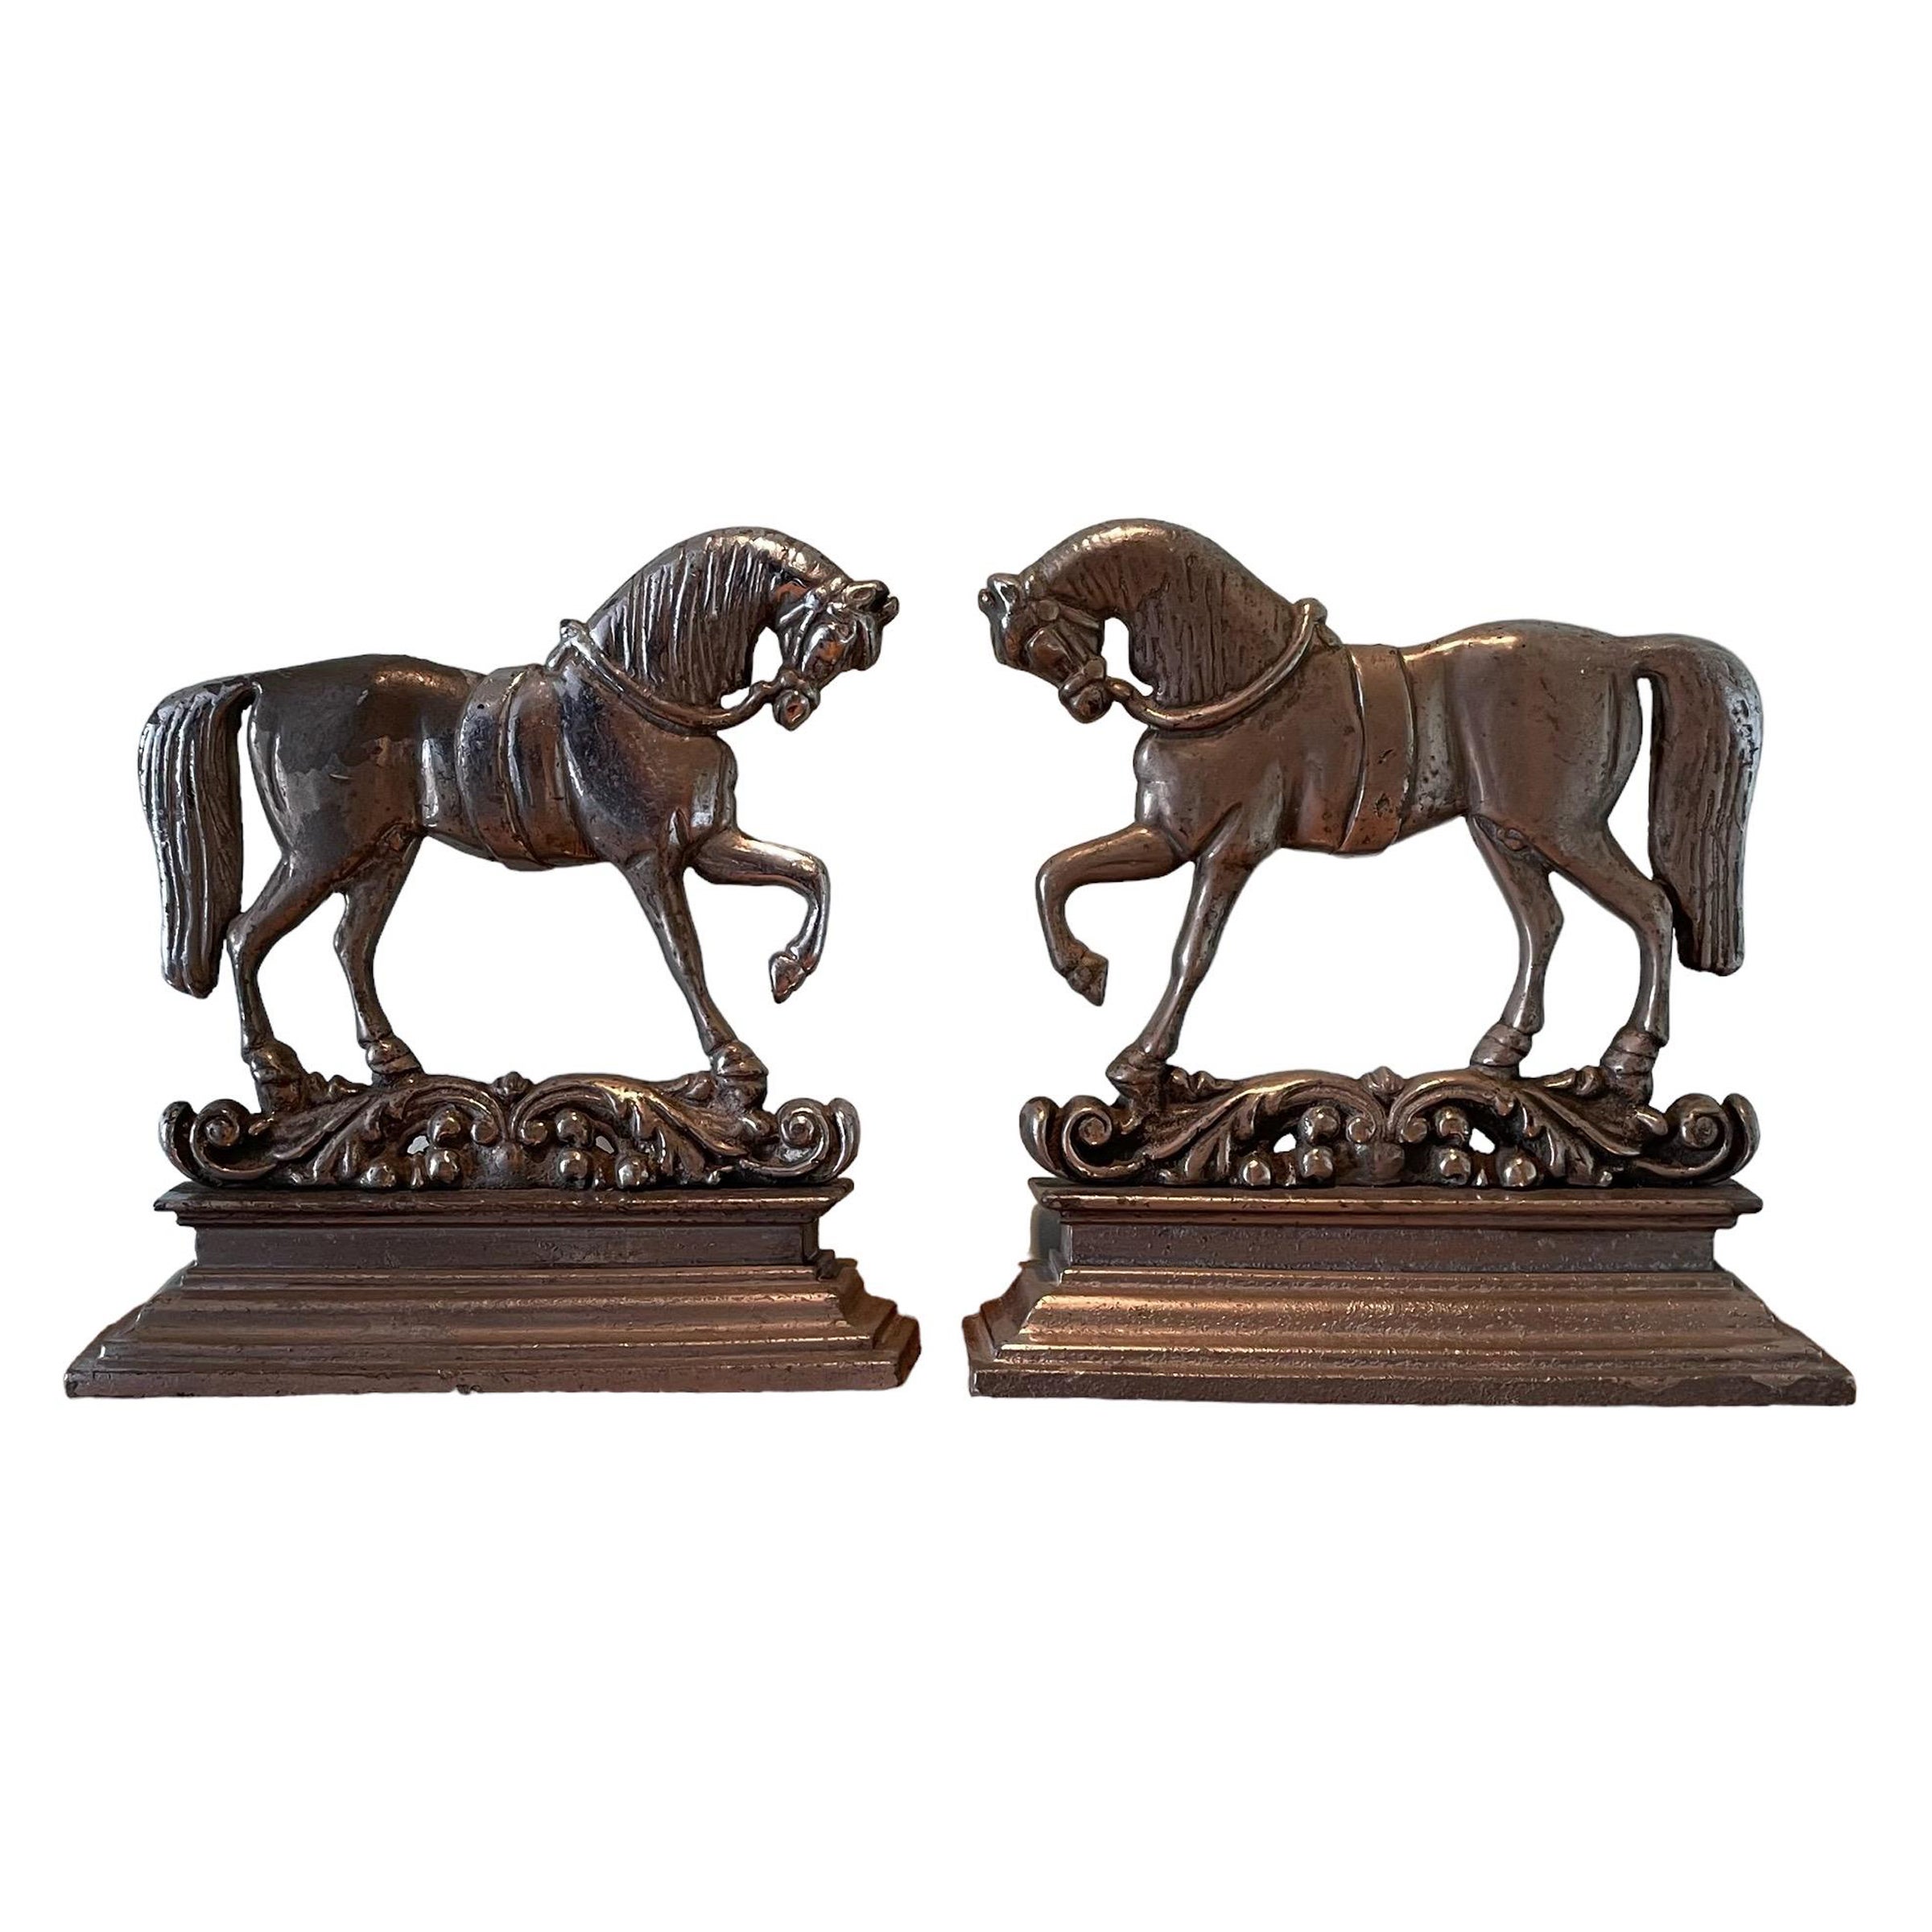 A pair of prancing horse door stops made from pewter with a chrome,
made in around 1920 the finish in original distressed condition showing great patina.
